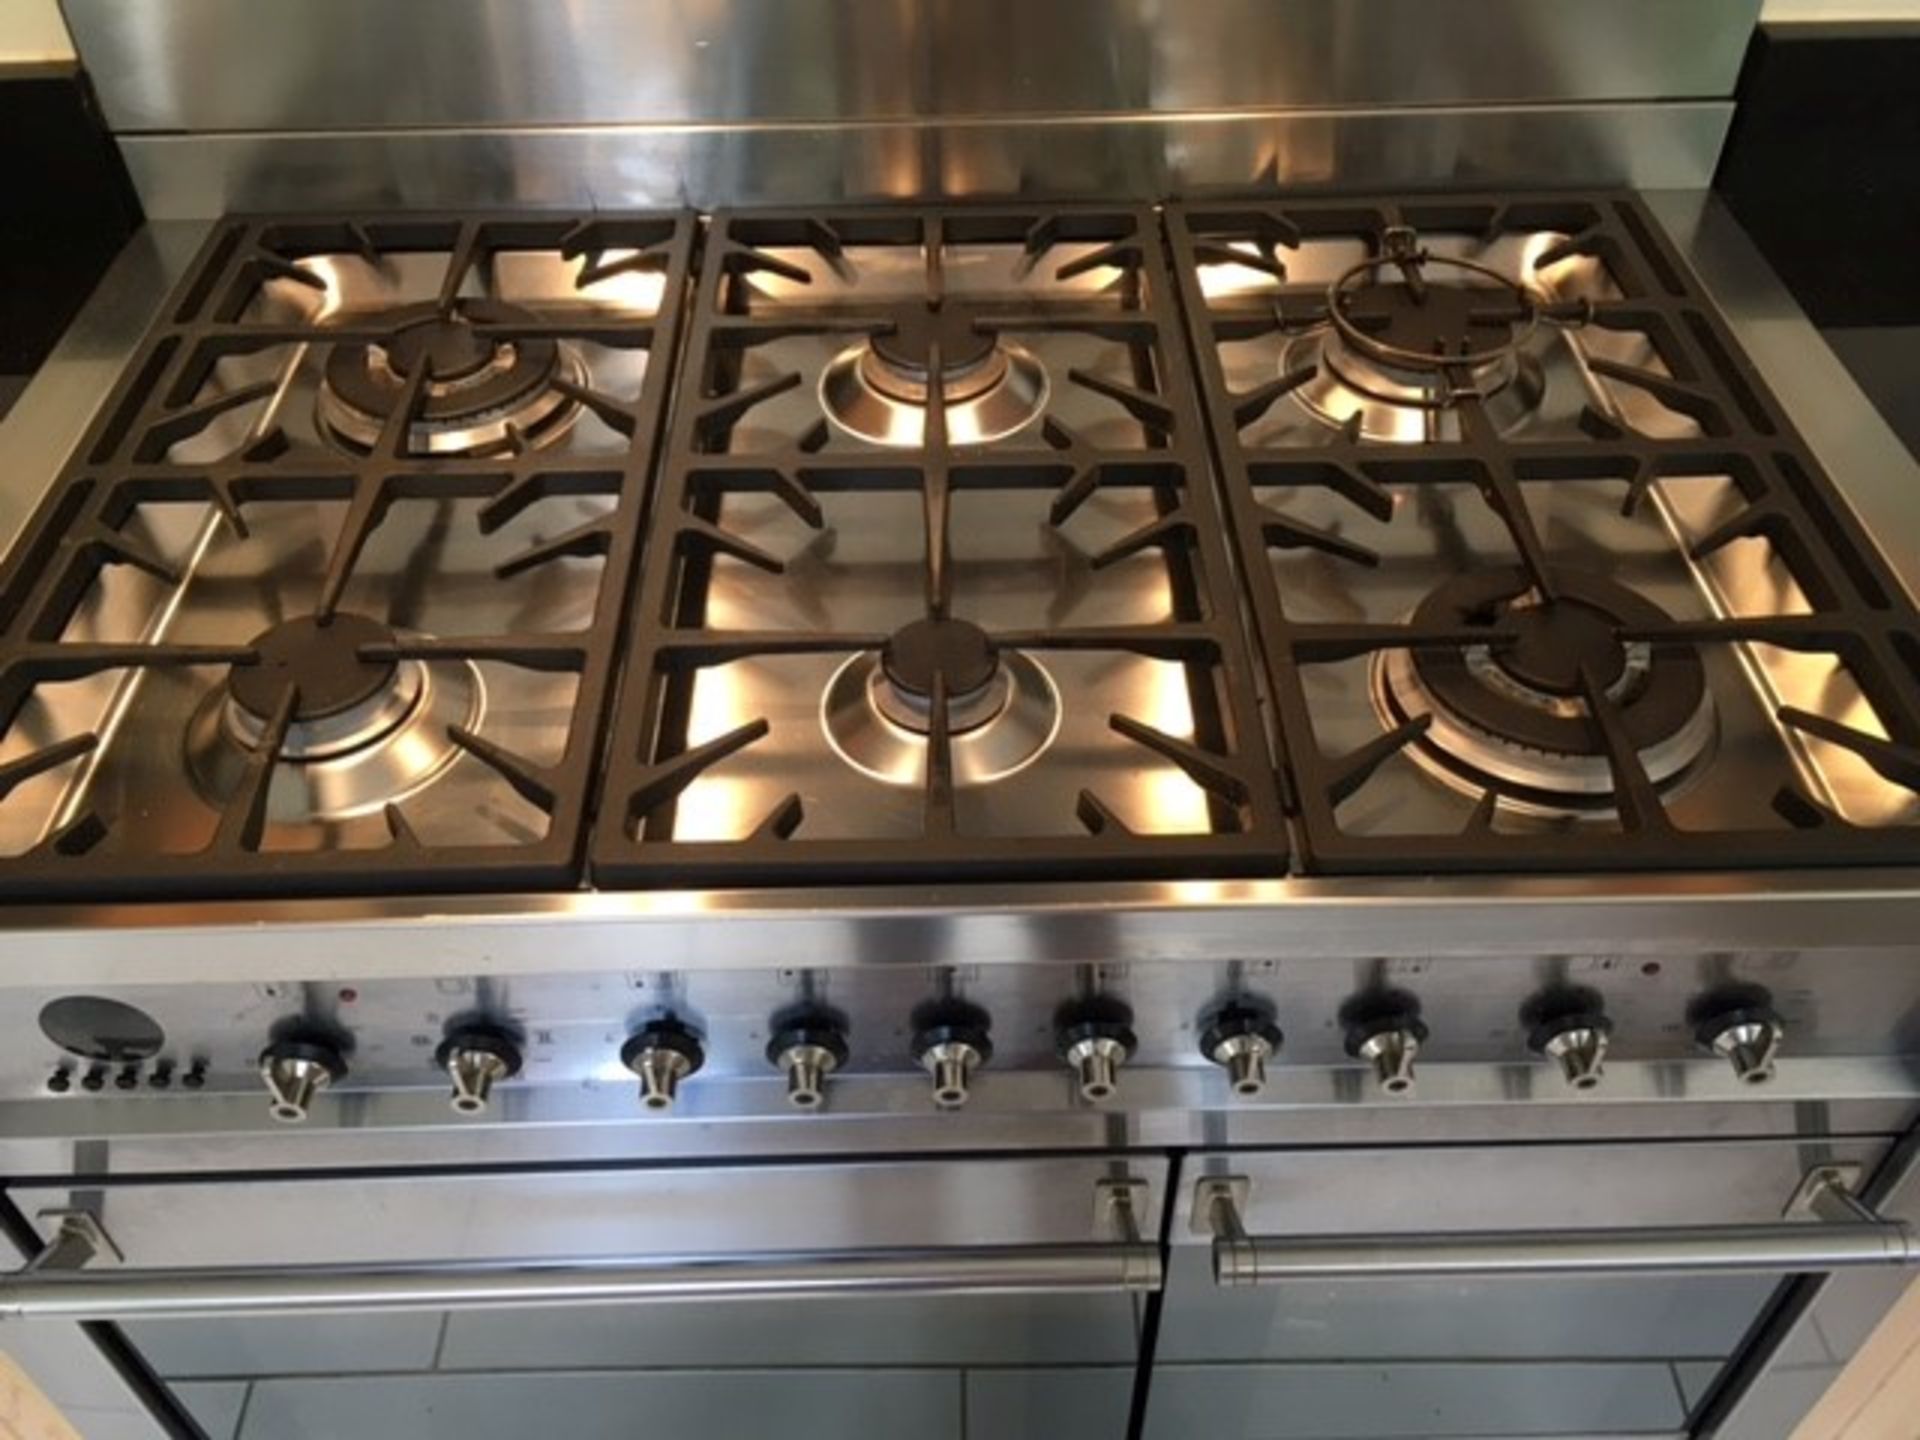 1 x Smeg Stainless Steel A2-5 Dual Fuel 6 Burner Cooker With Smeg Extractor, and Splashback - - Image 3 of 14